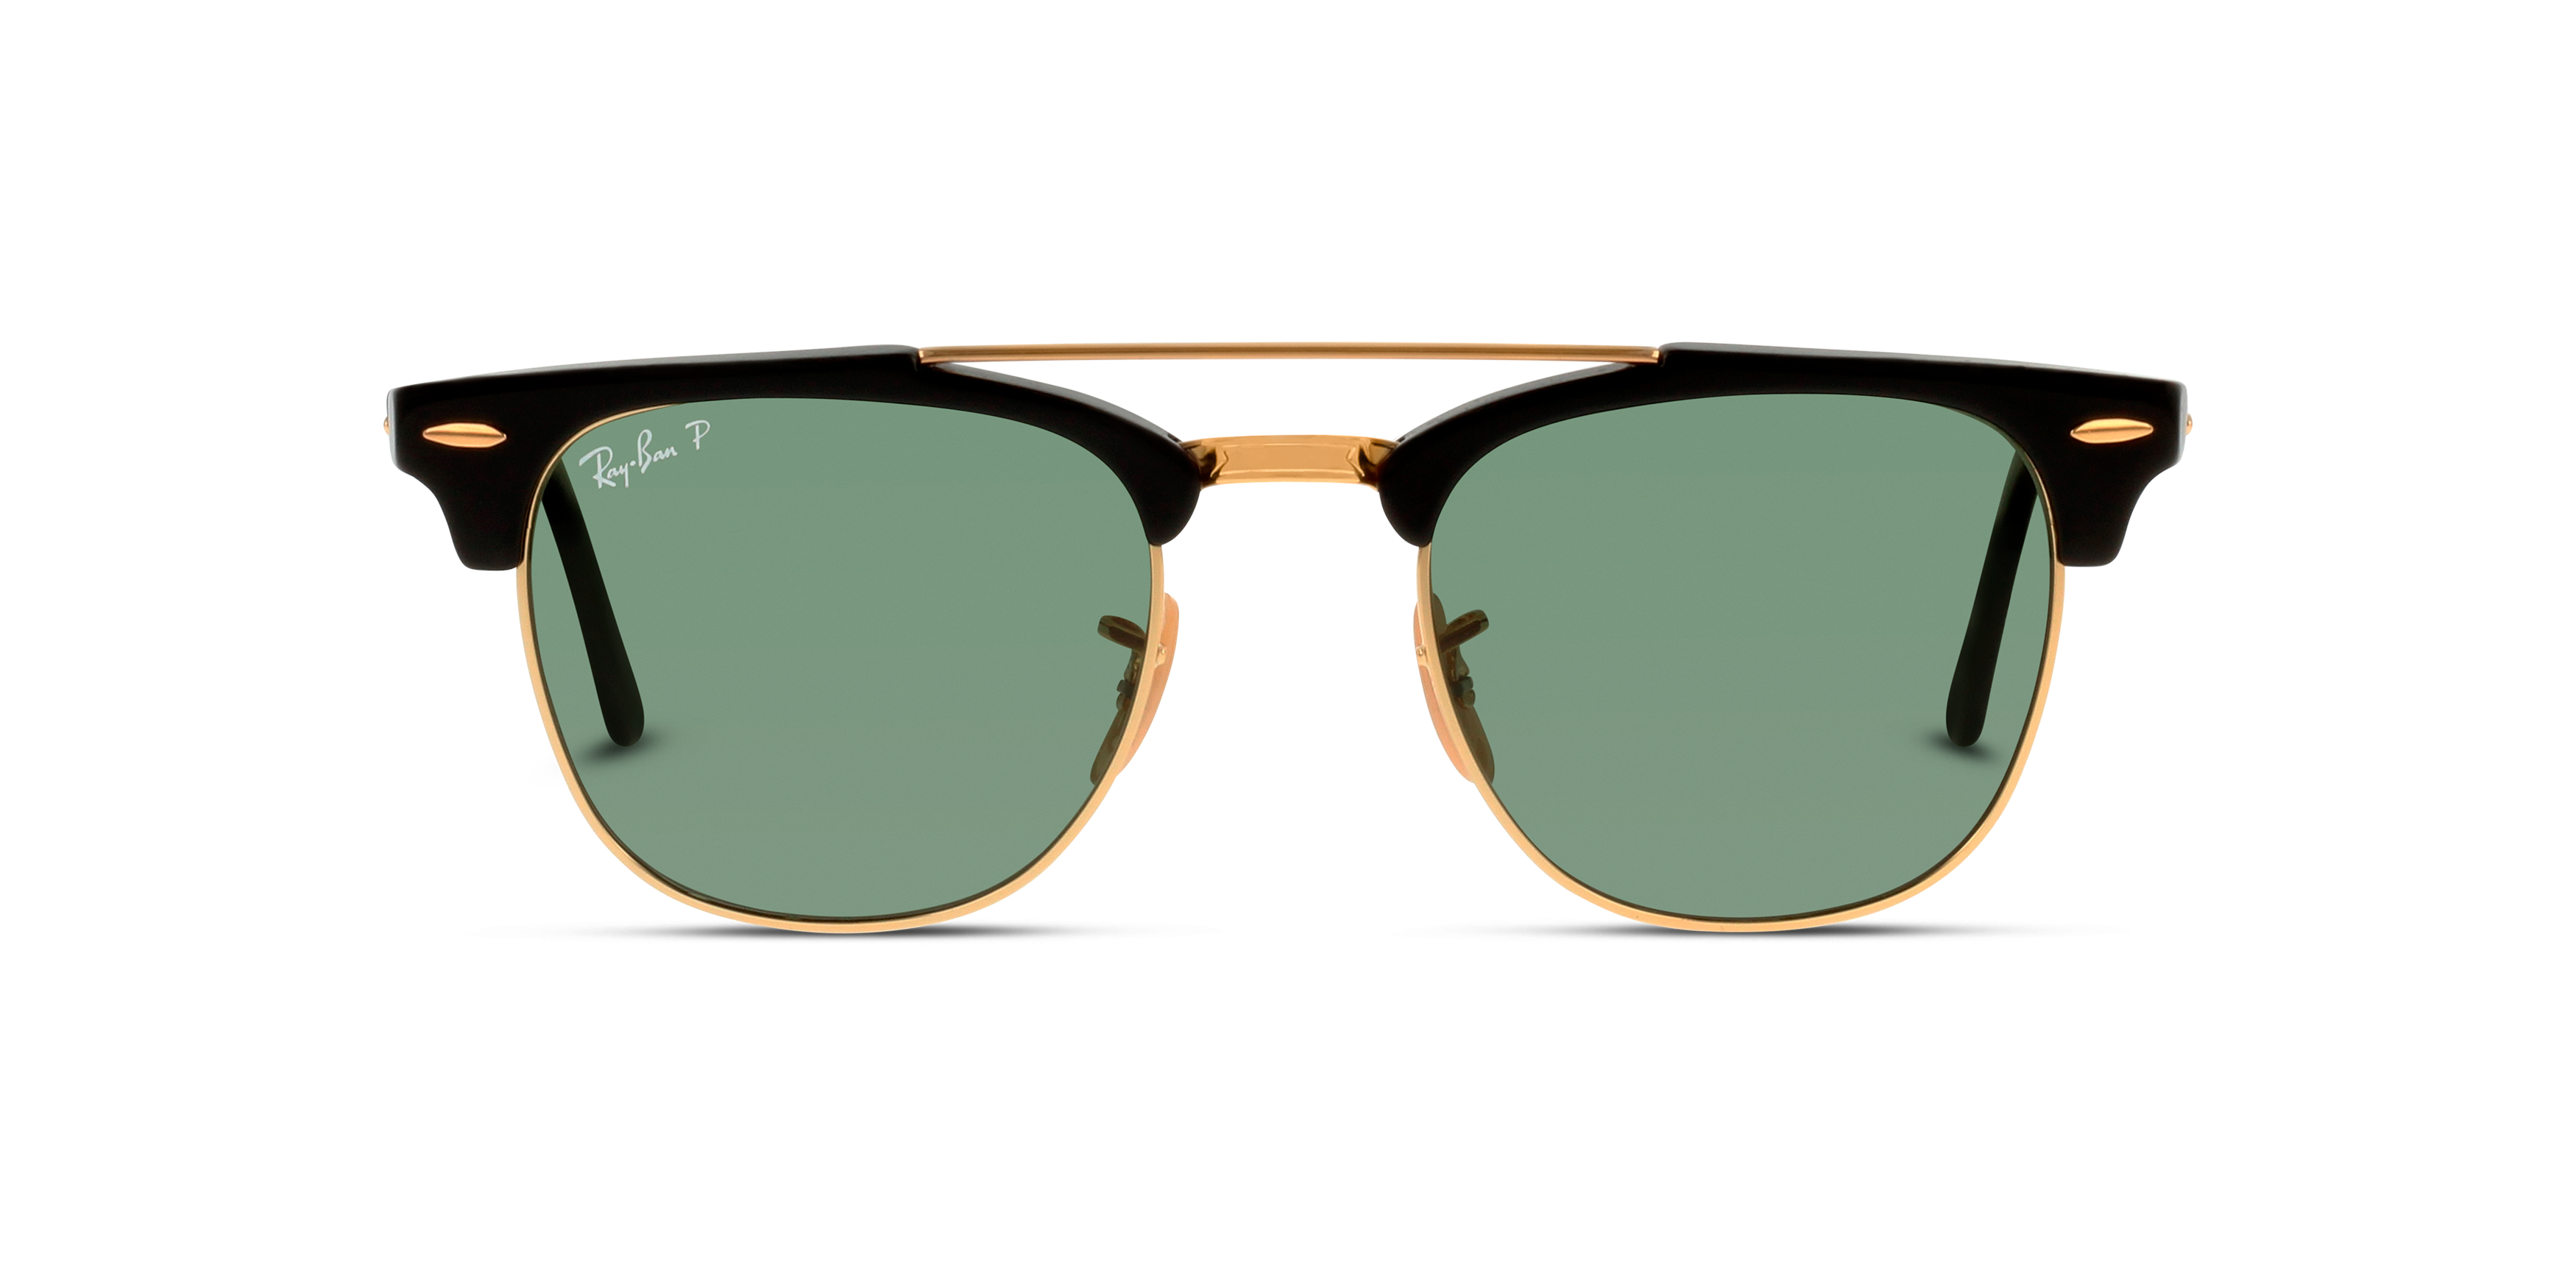 [products.image.front] Ray-Ban Clubmaster Doublebridge RB3816 901/58